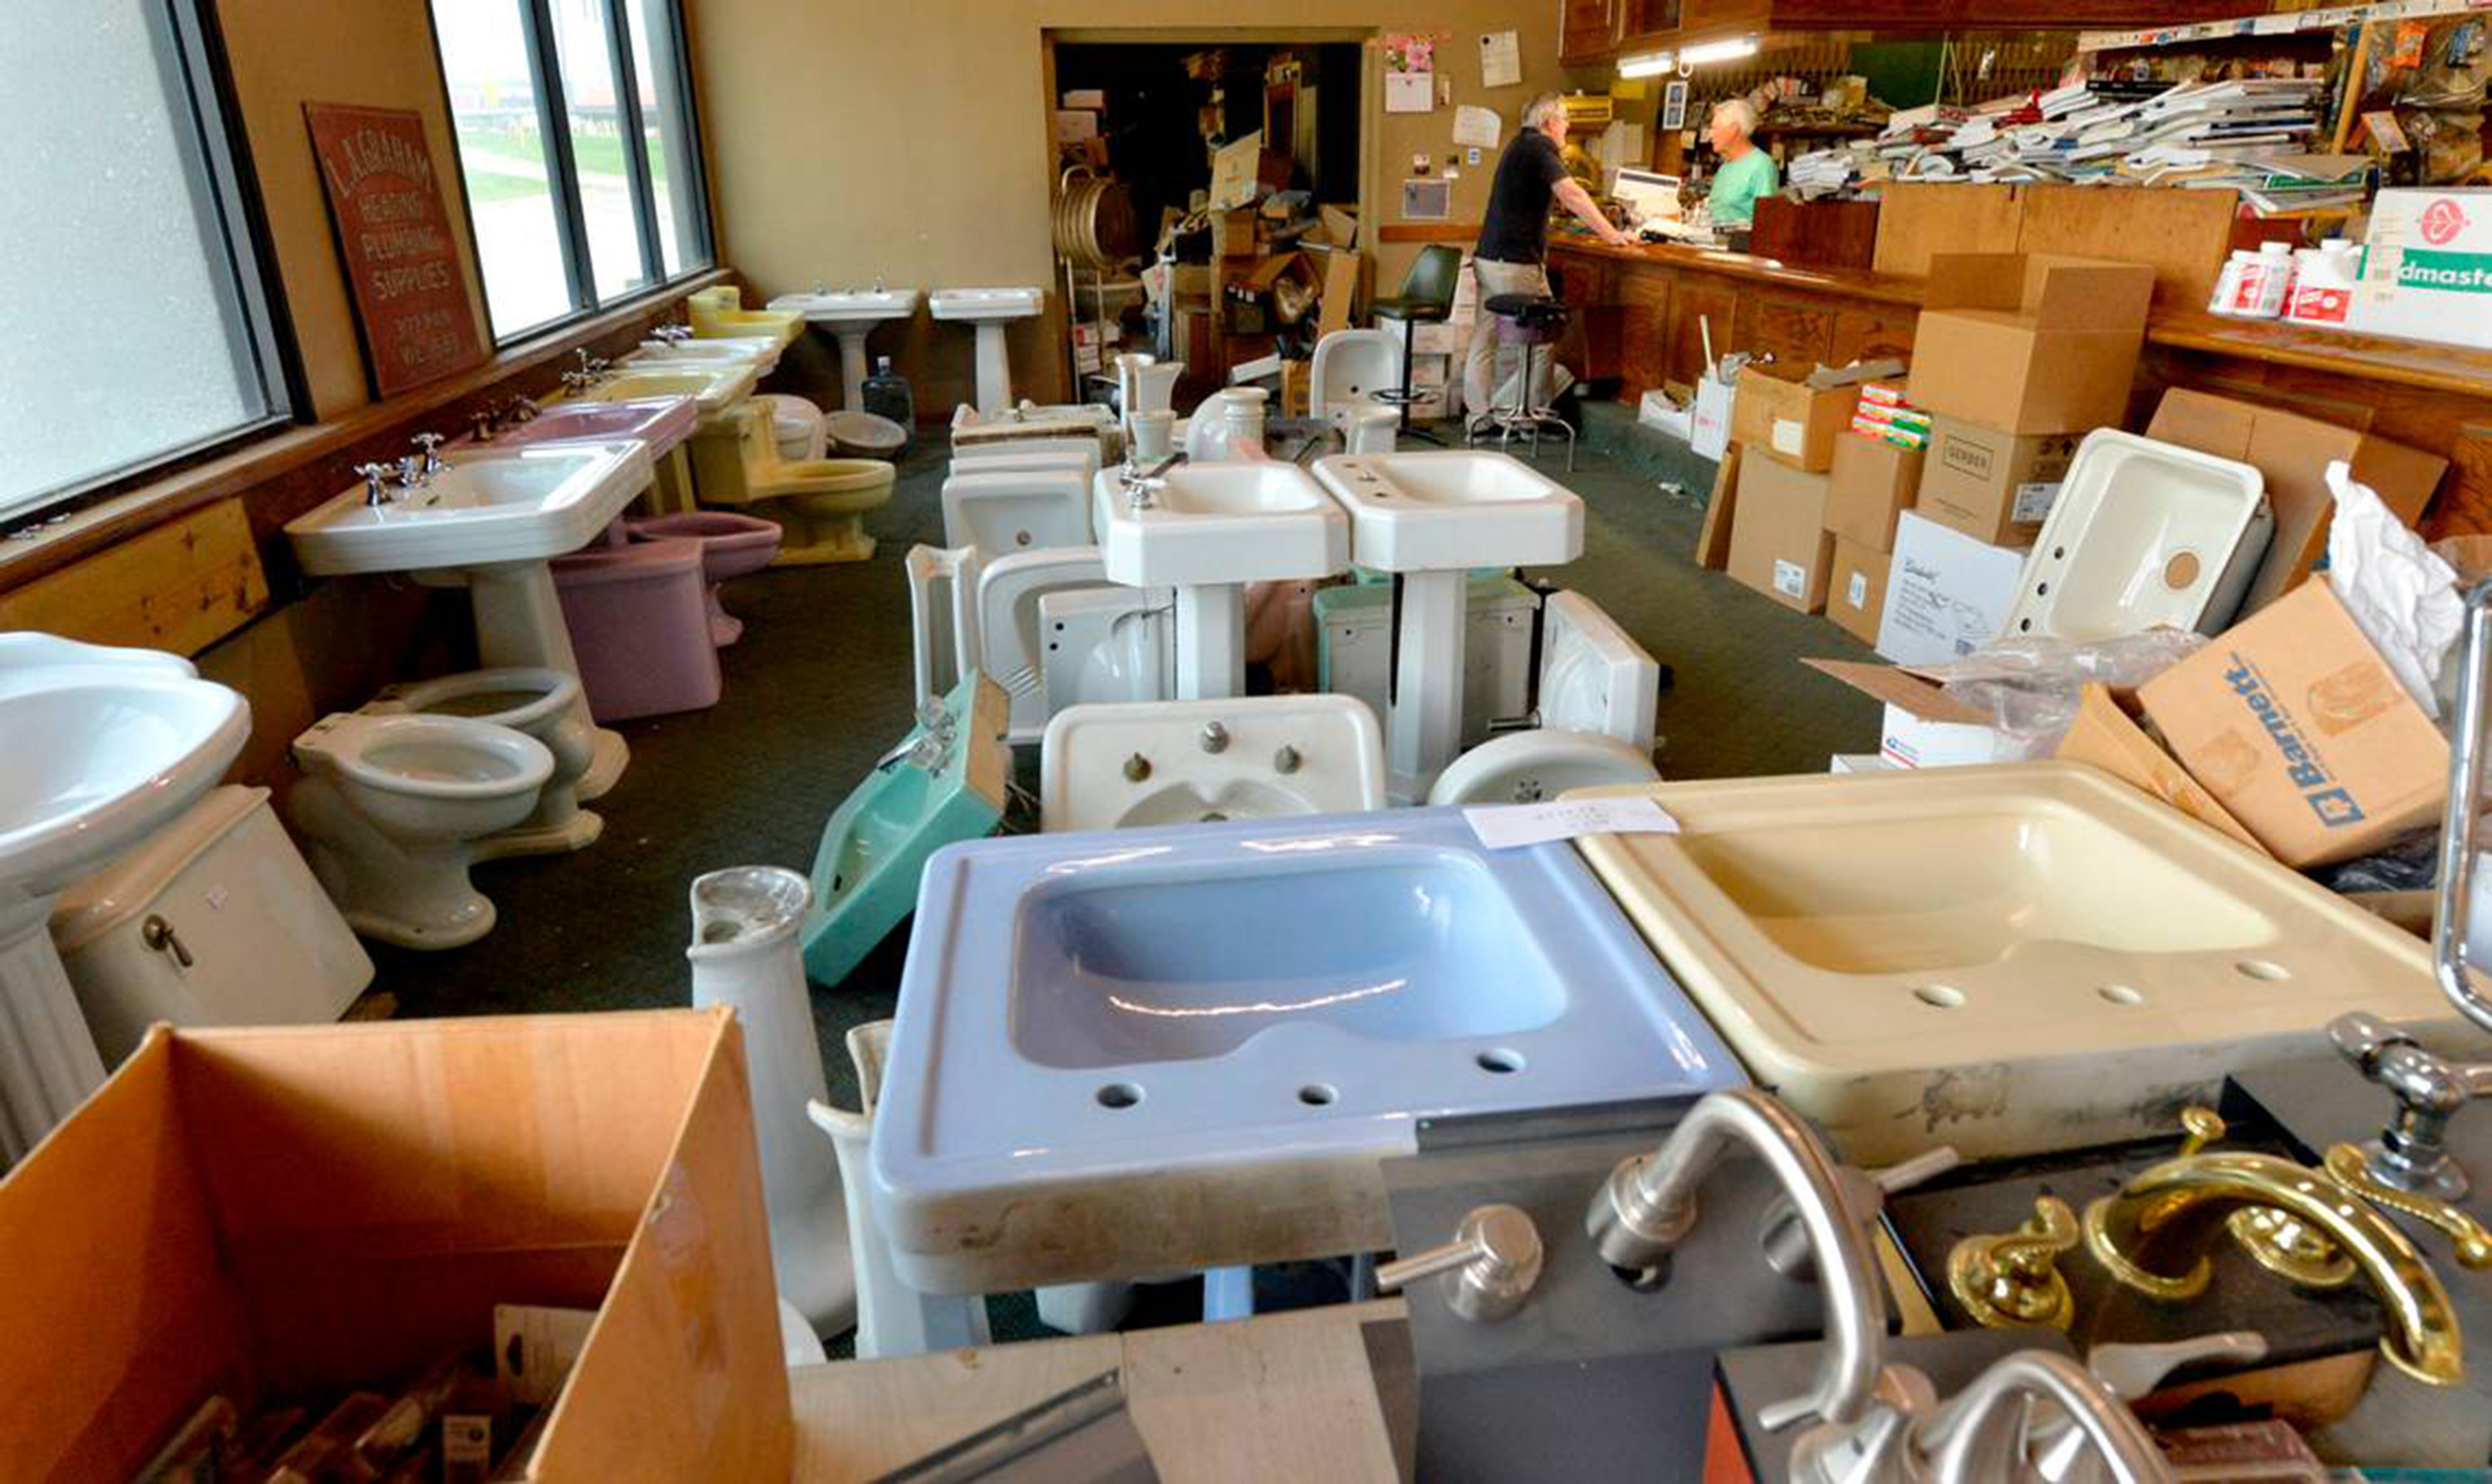 Bill Graham's showroom floor is a sea of dozens of white and pastel-colored sinks and toilet bowls